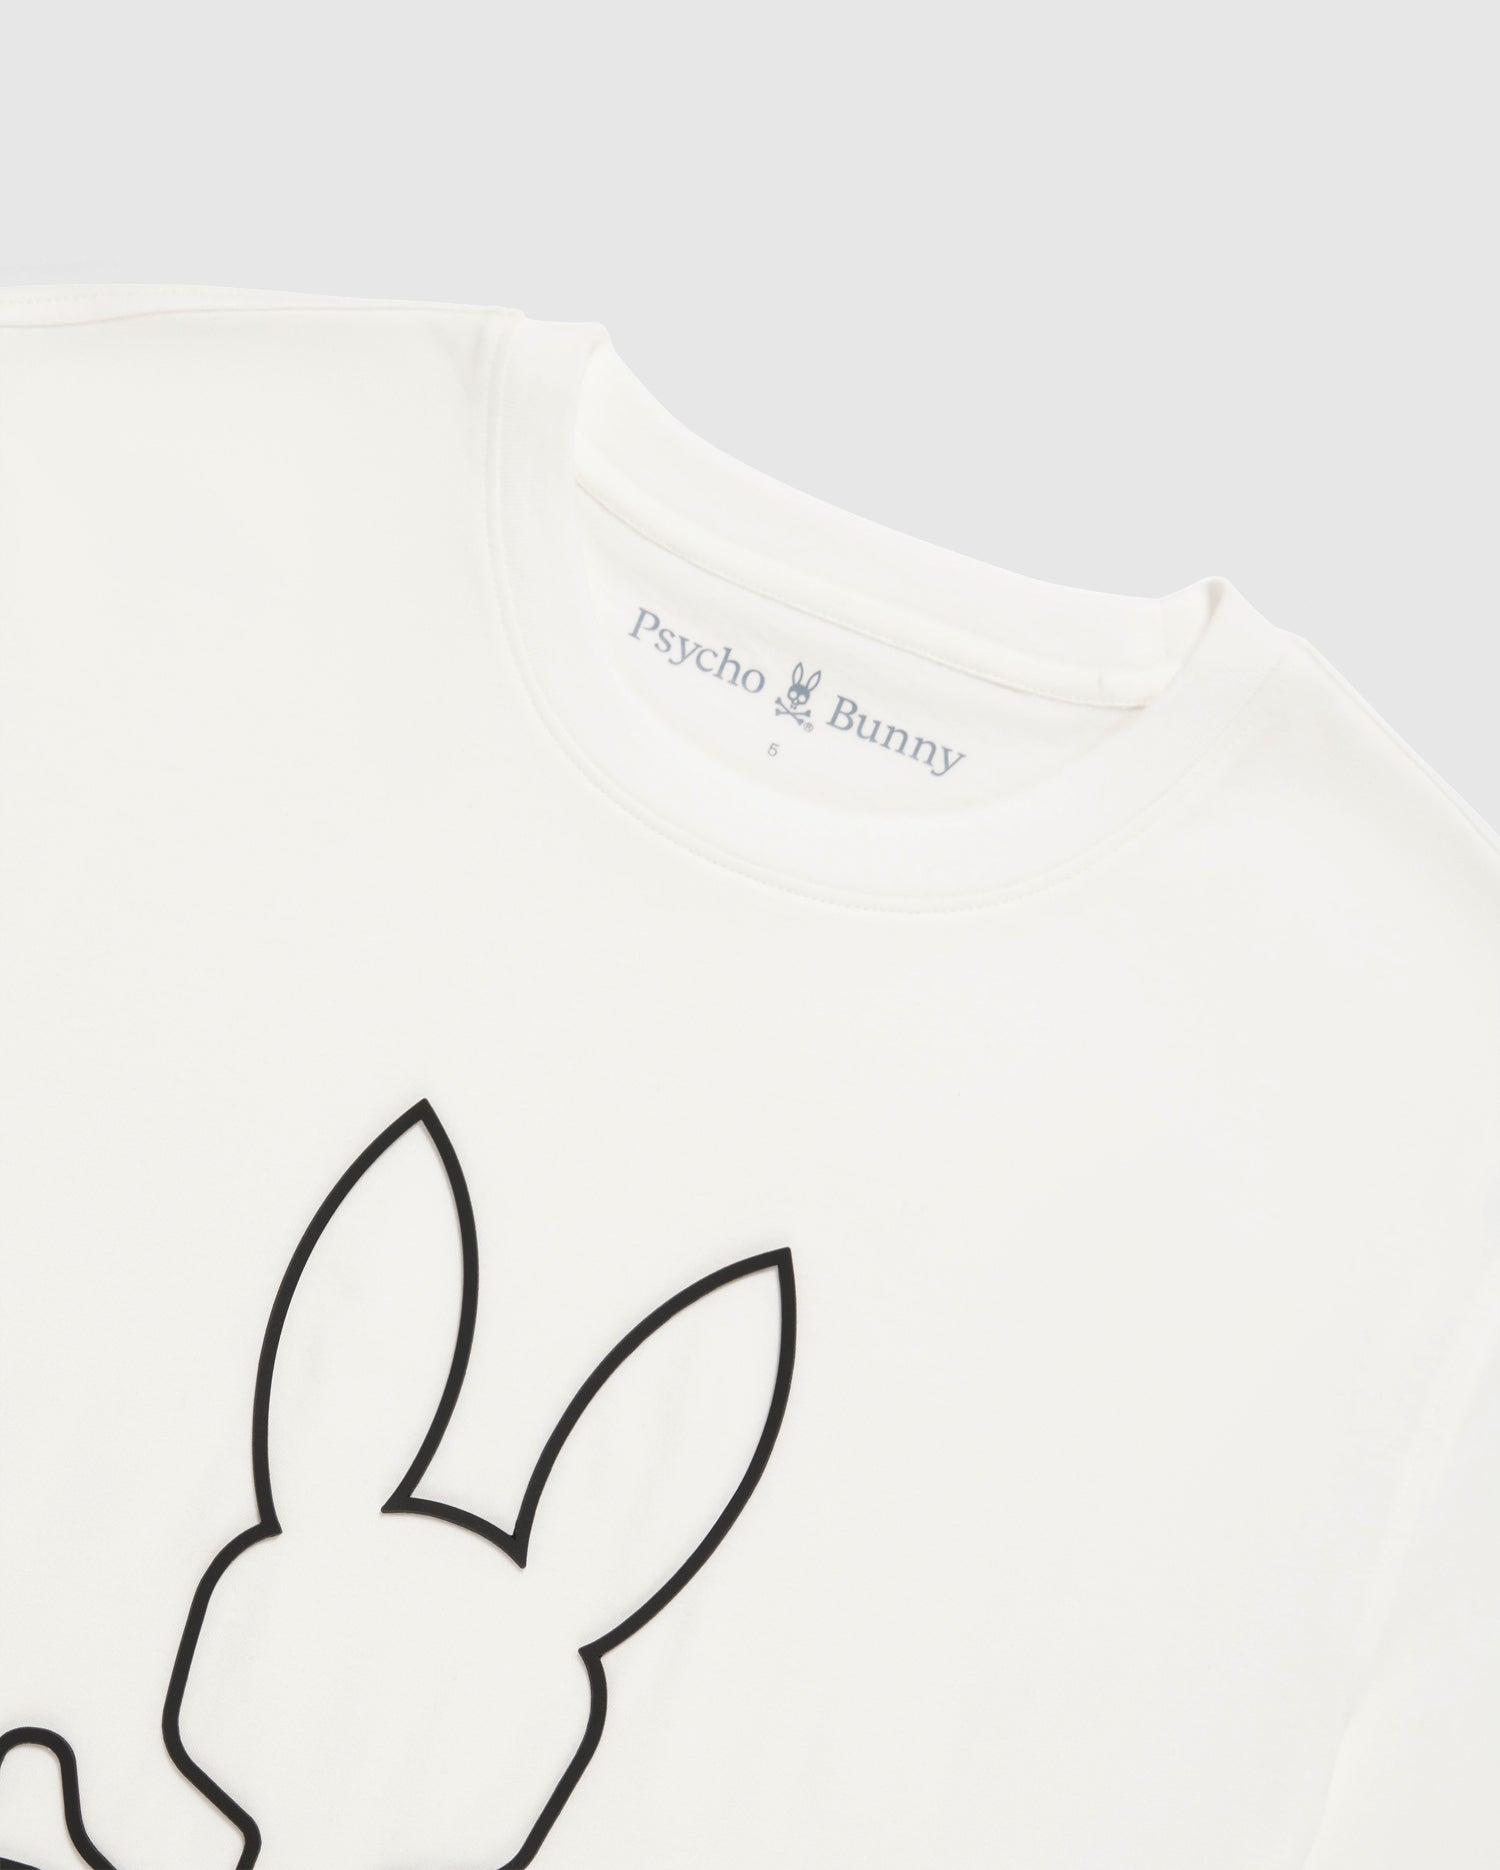 Take a tour with @David, Men's Fashion of our latest Psycho Bunny sto, Psycho Bunny